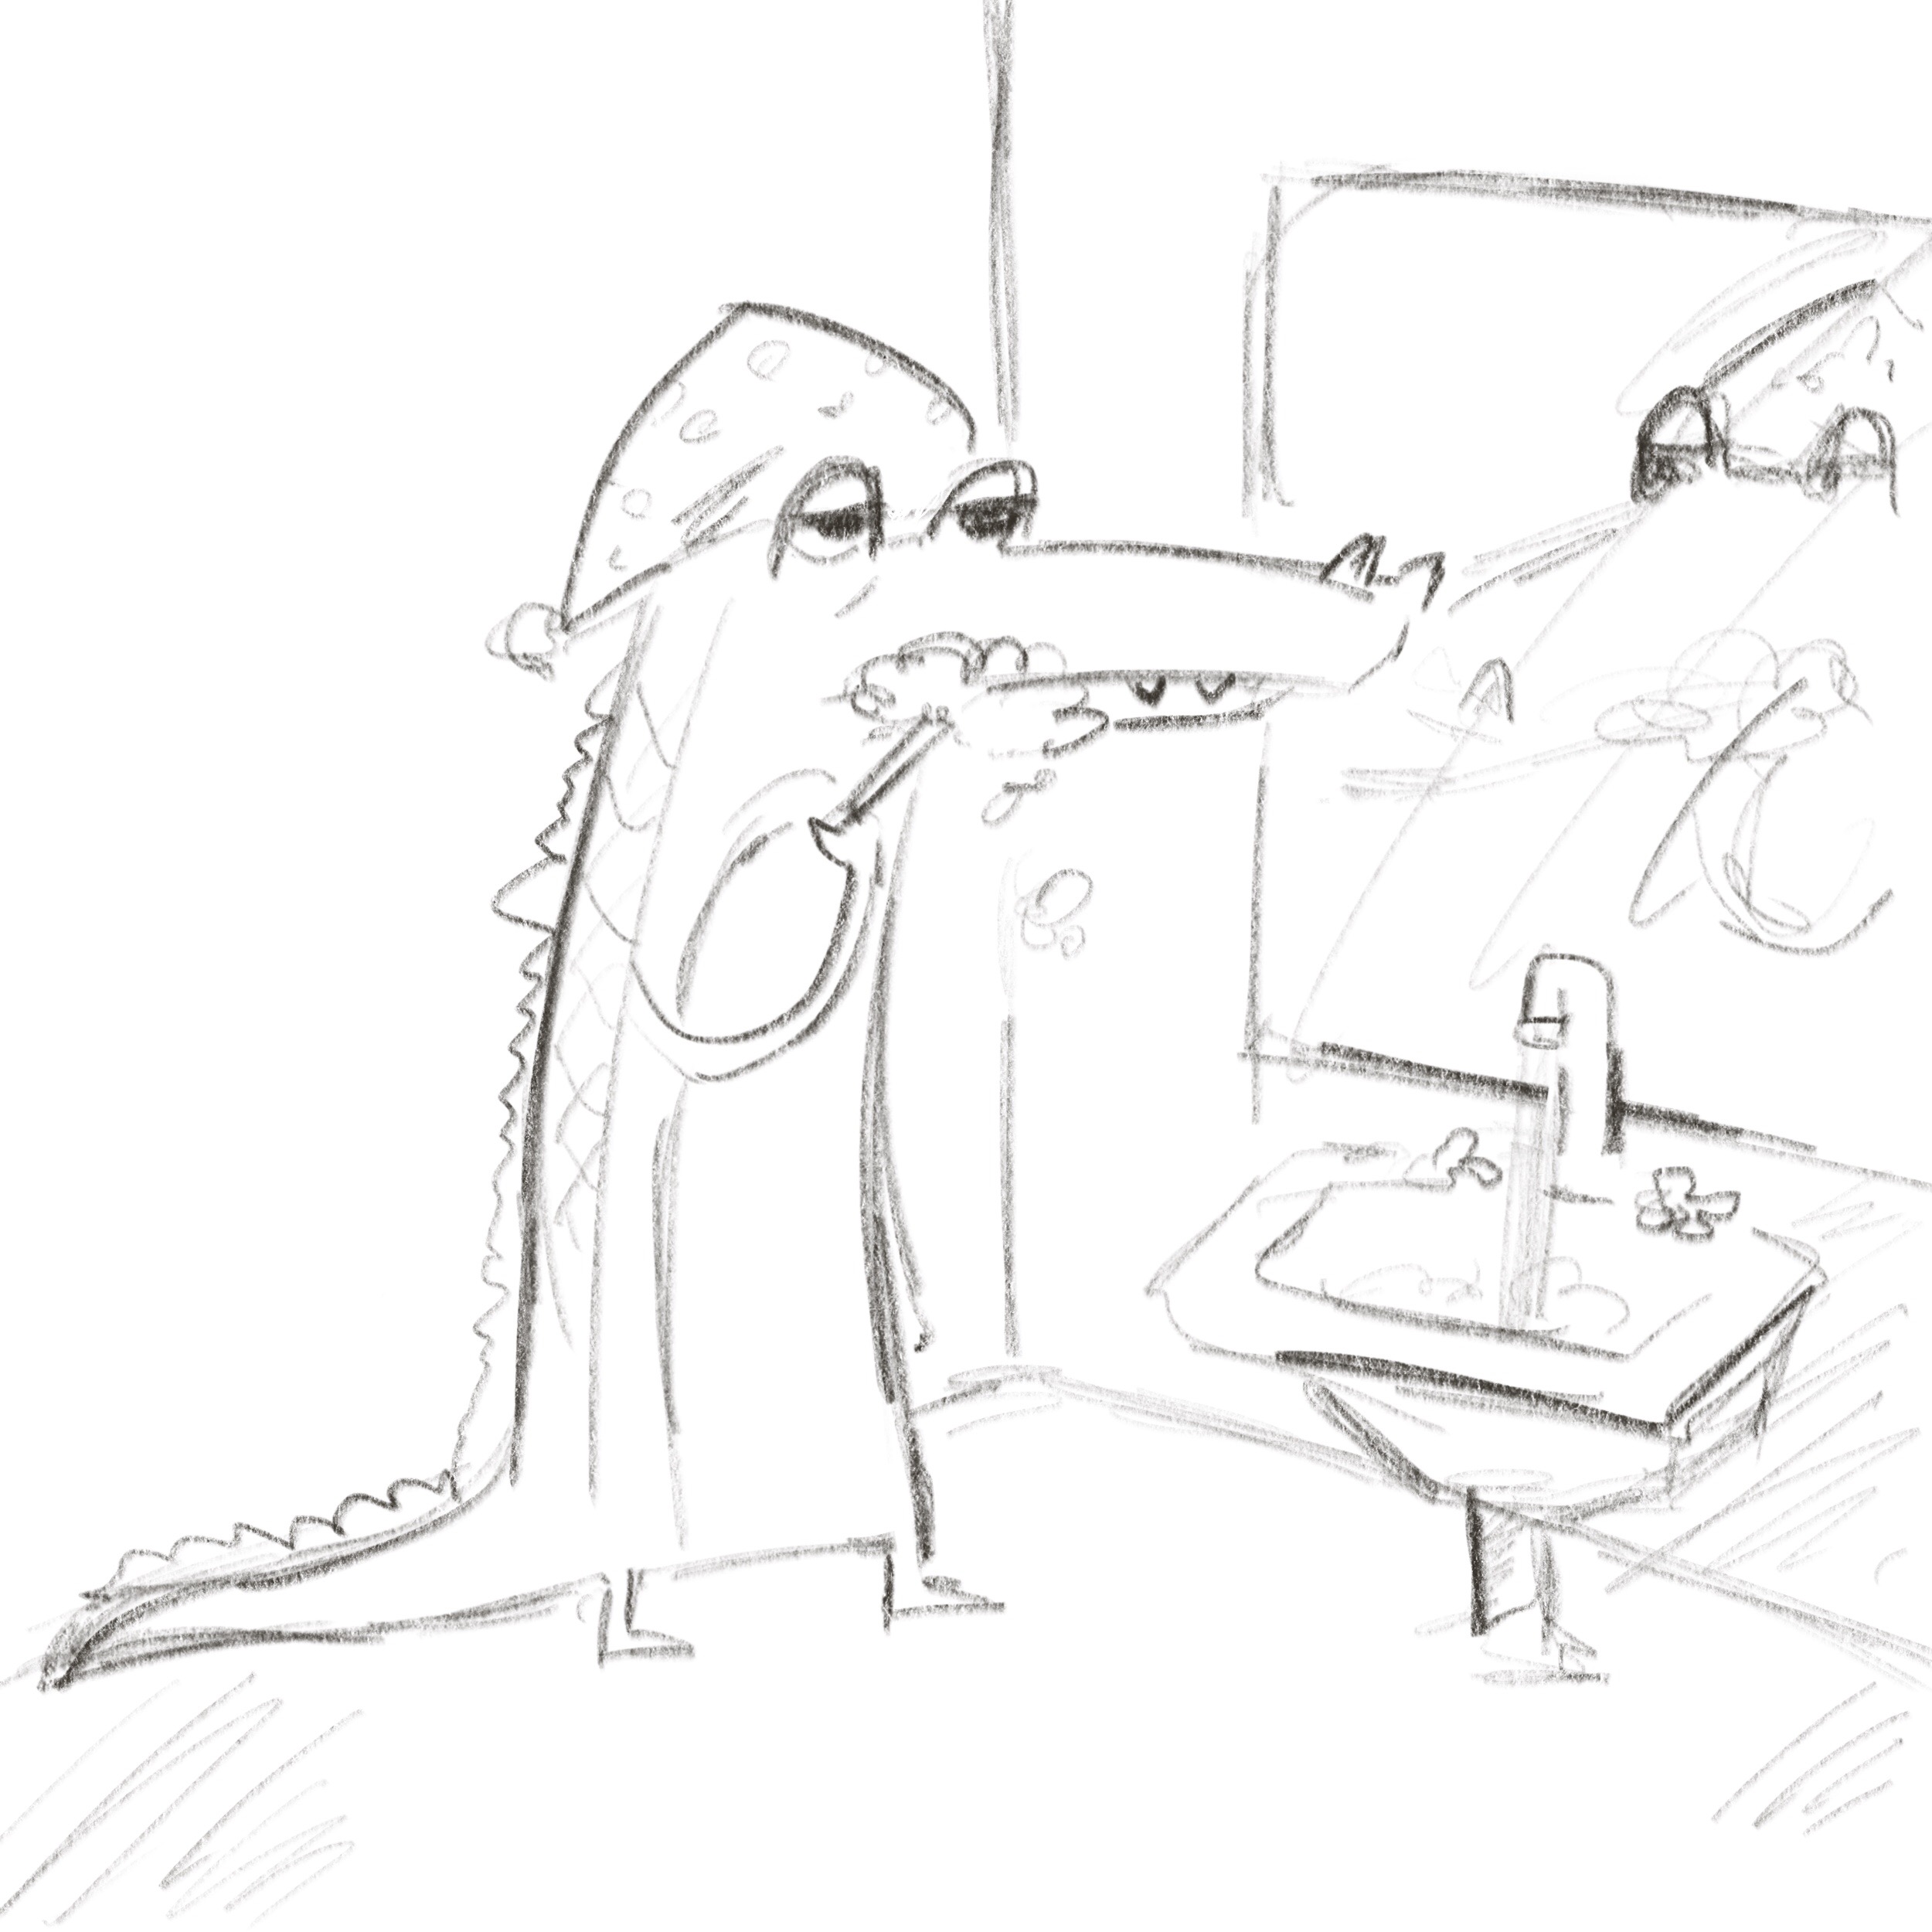 Frame one of drawing of alligator in the bathroom brushing his teeth